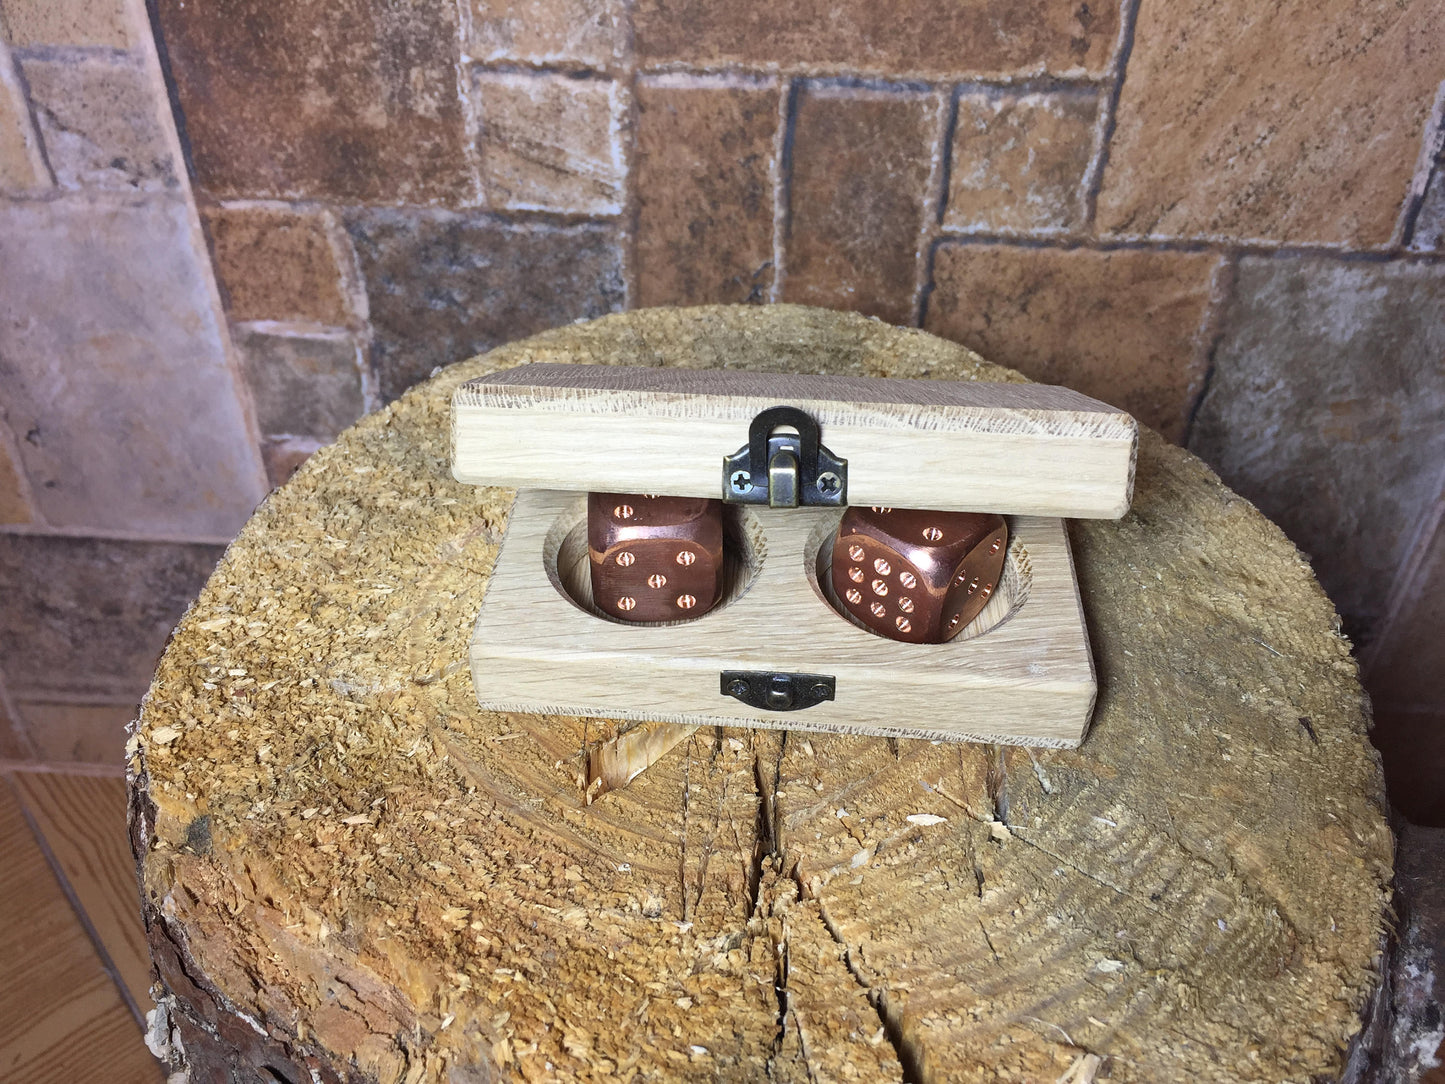 Copper dices with dice box, engraved dice box, personalized dice box,dice games,wooden box for dices,tabletop gaming,board games,copper gift